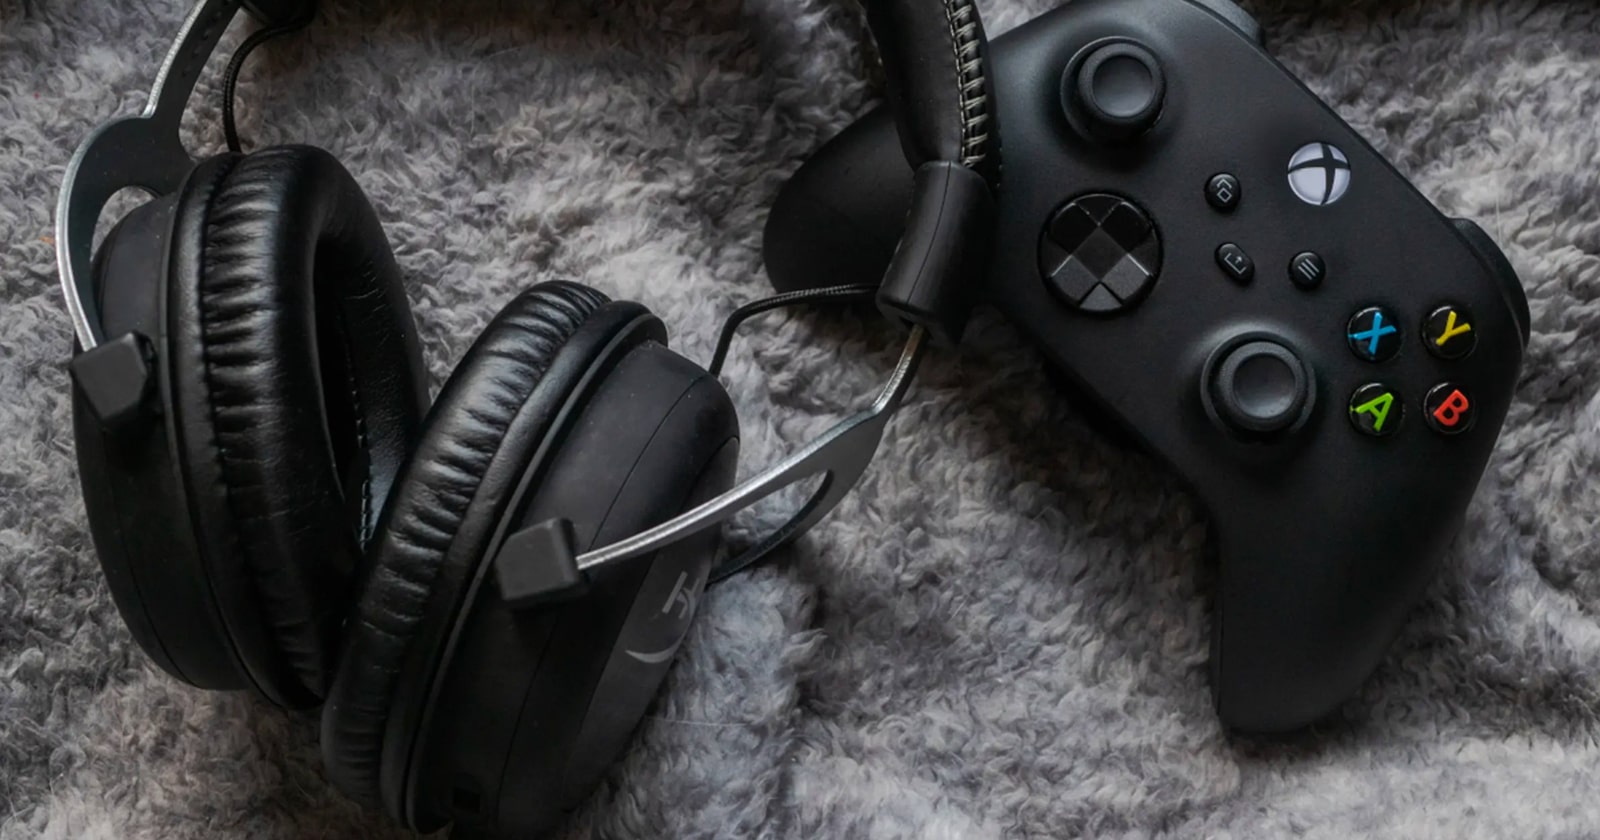 How to Connect Bluetooth Headphones to Xbox One without Adapter?